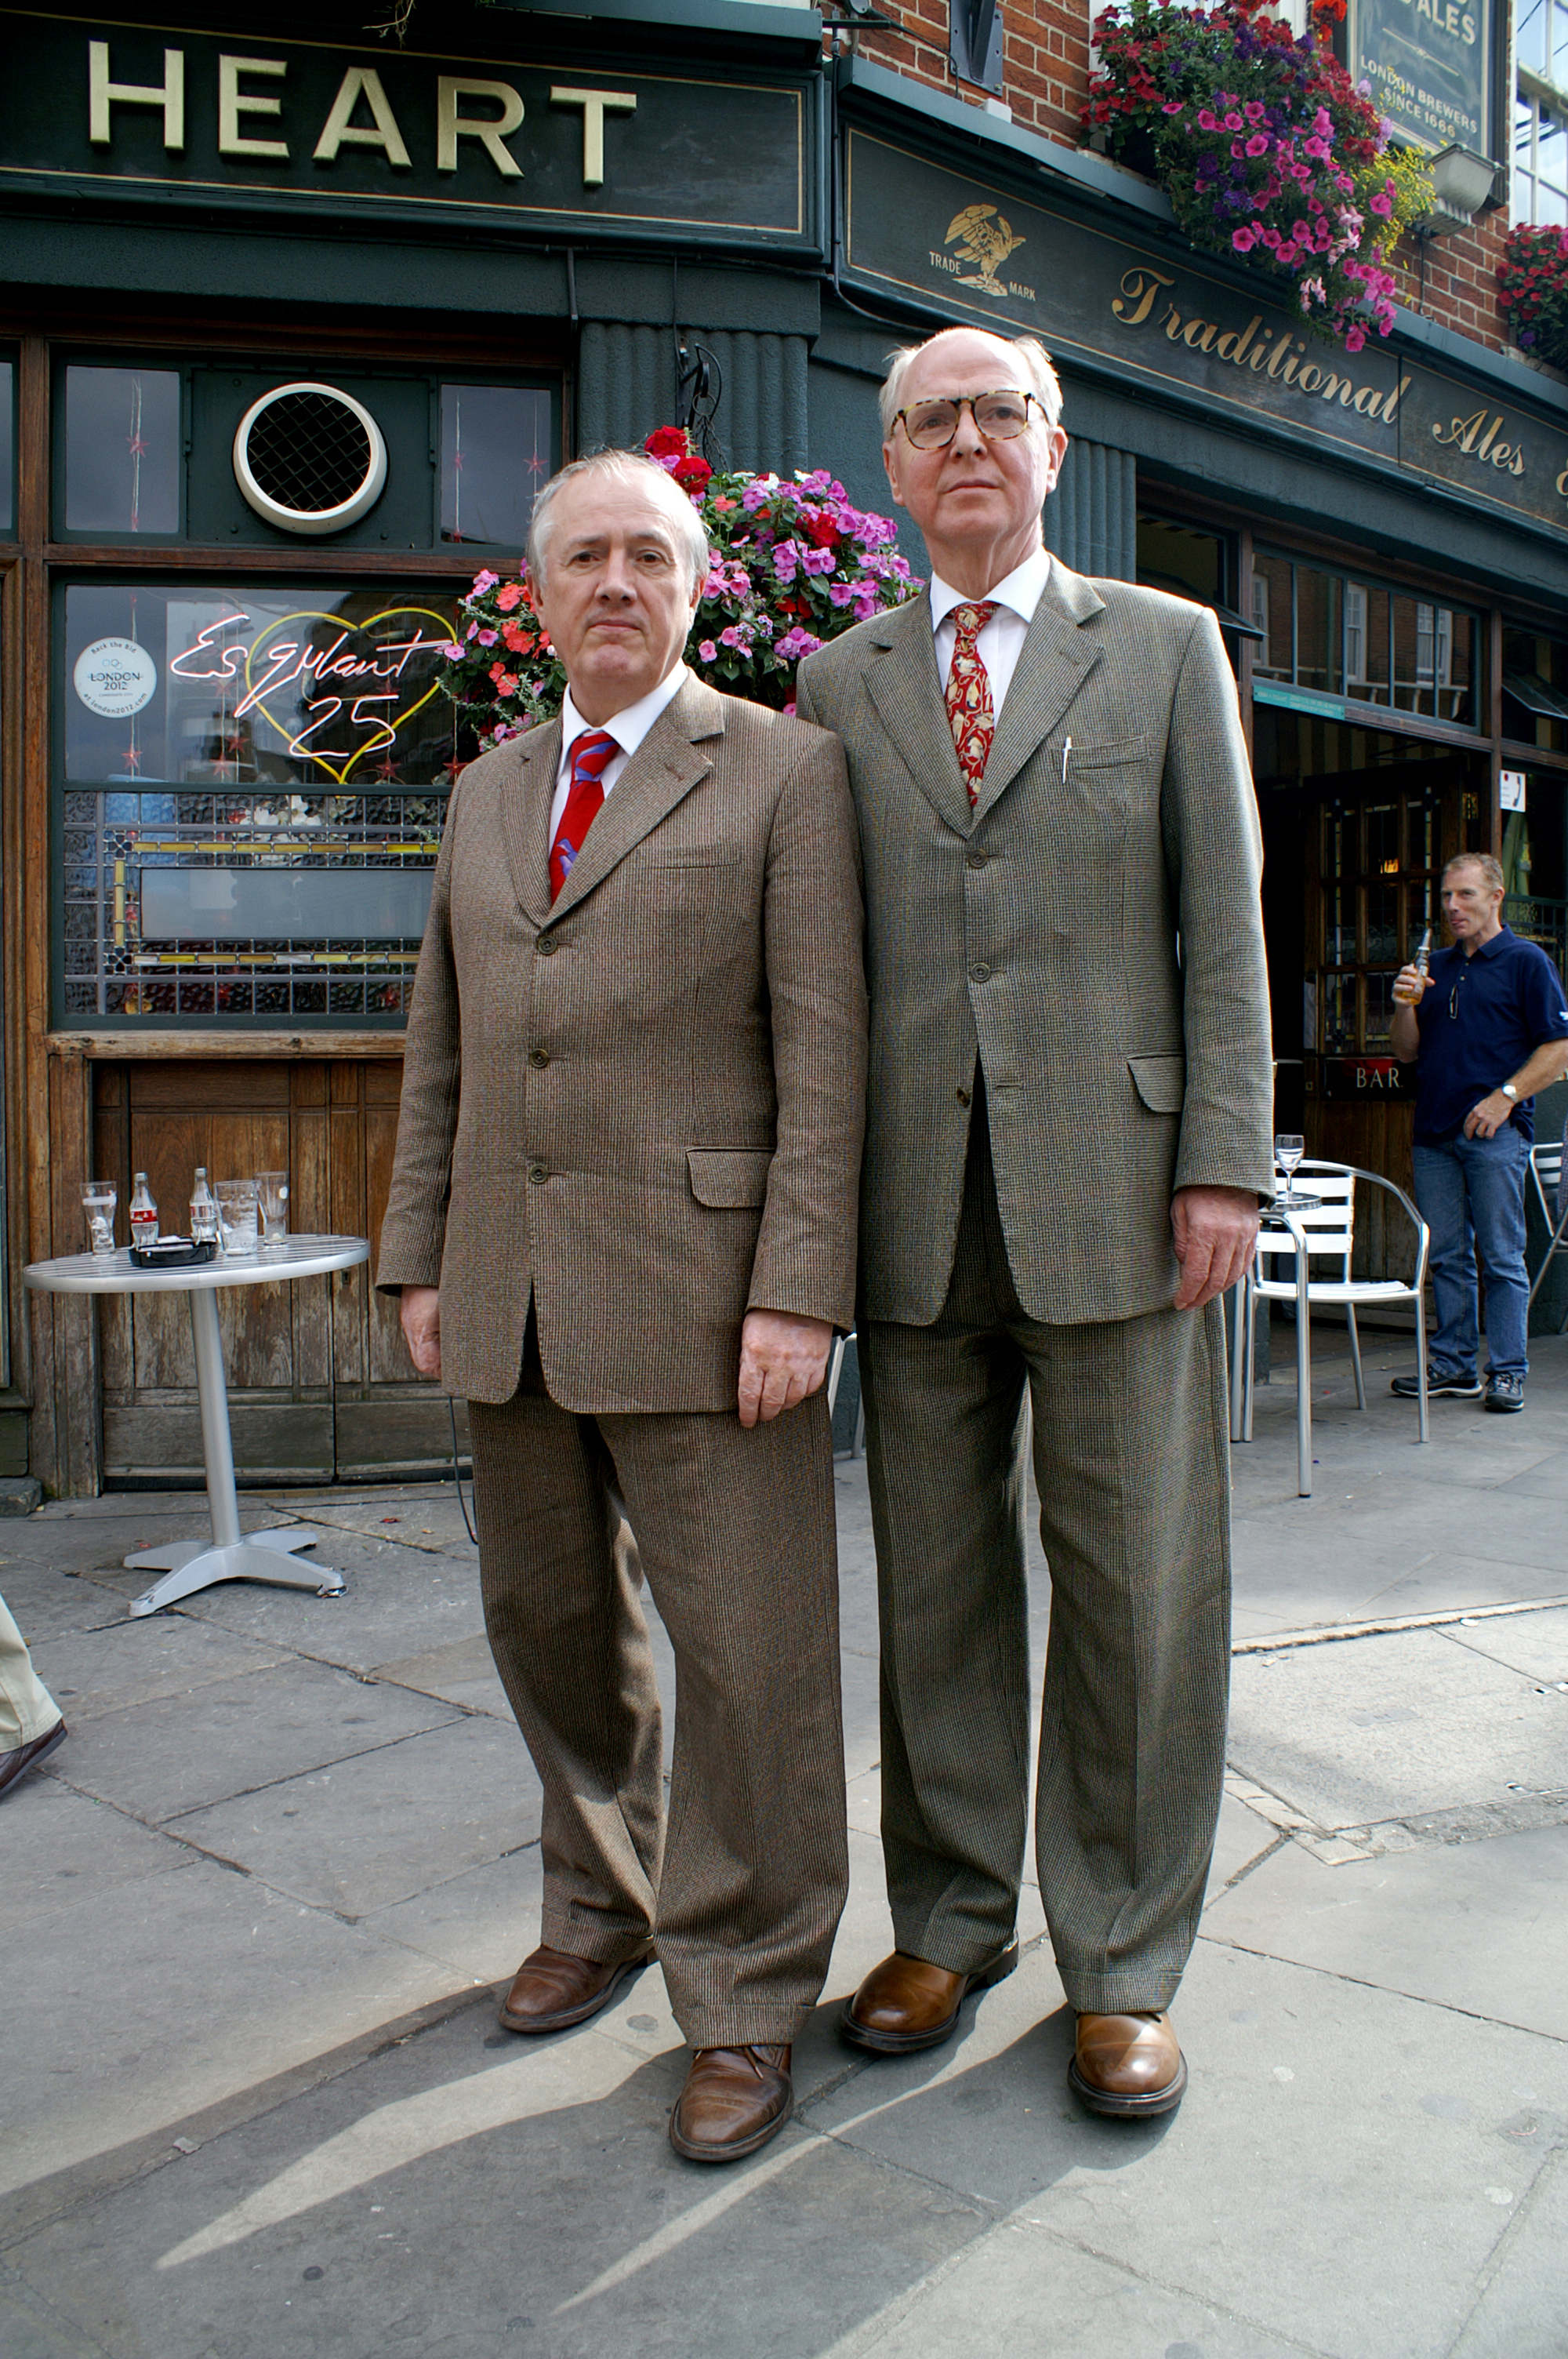 Image of Gilbert & George from Wikidata